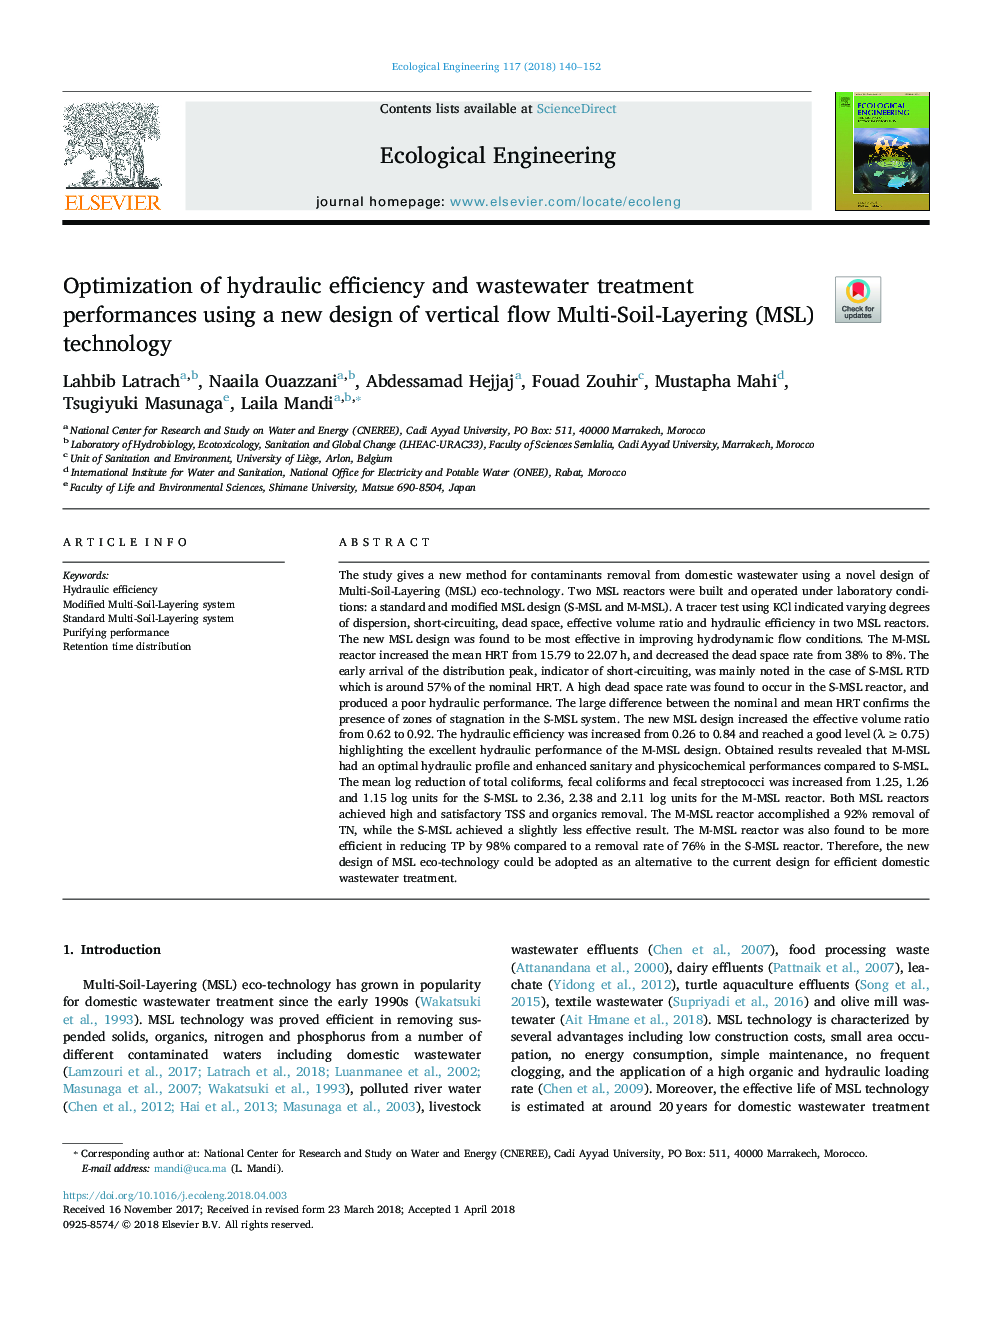 Optimization of hydraulic efficiency and wastewater treatment performances using a new design of vertical flow Multi-Soil-Layering (MSL) technology